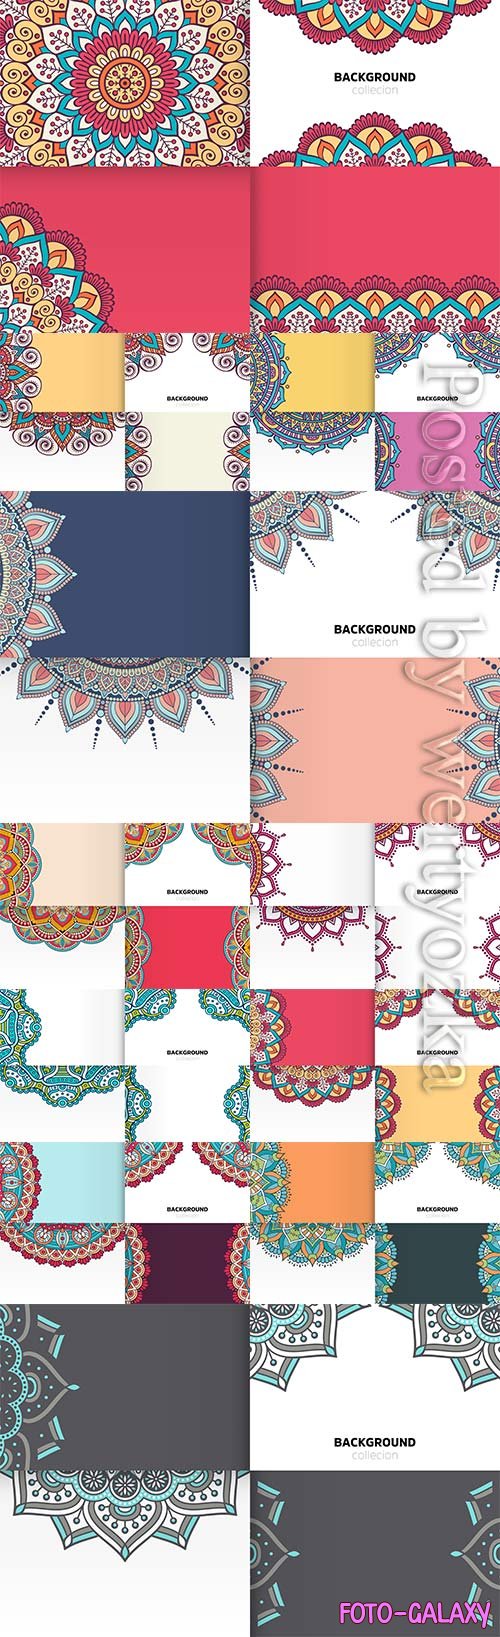 Background vector template in ethnic style